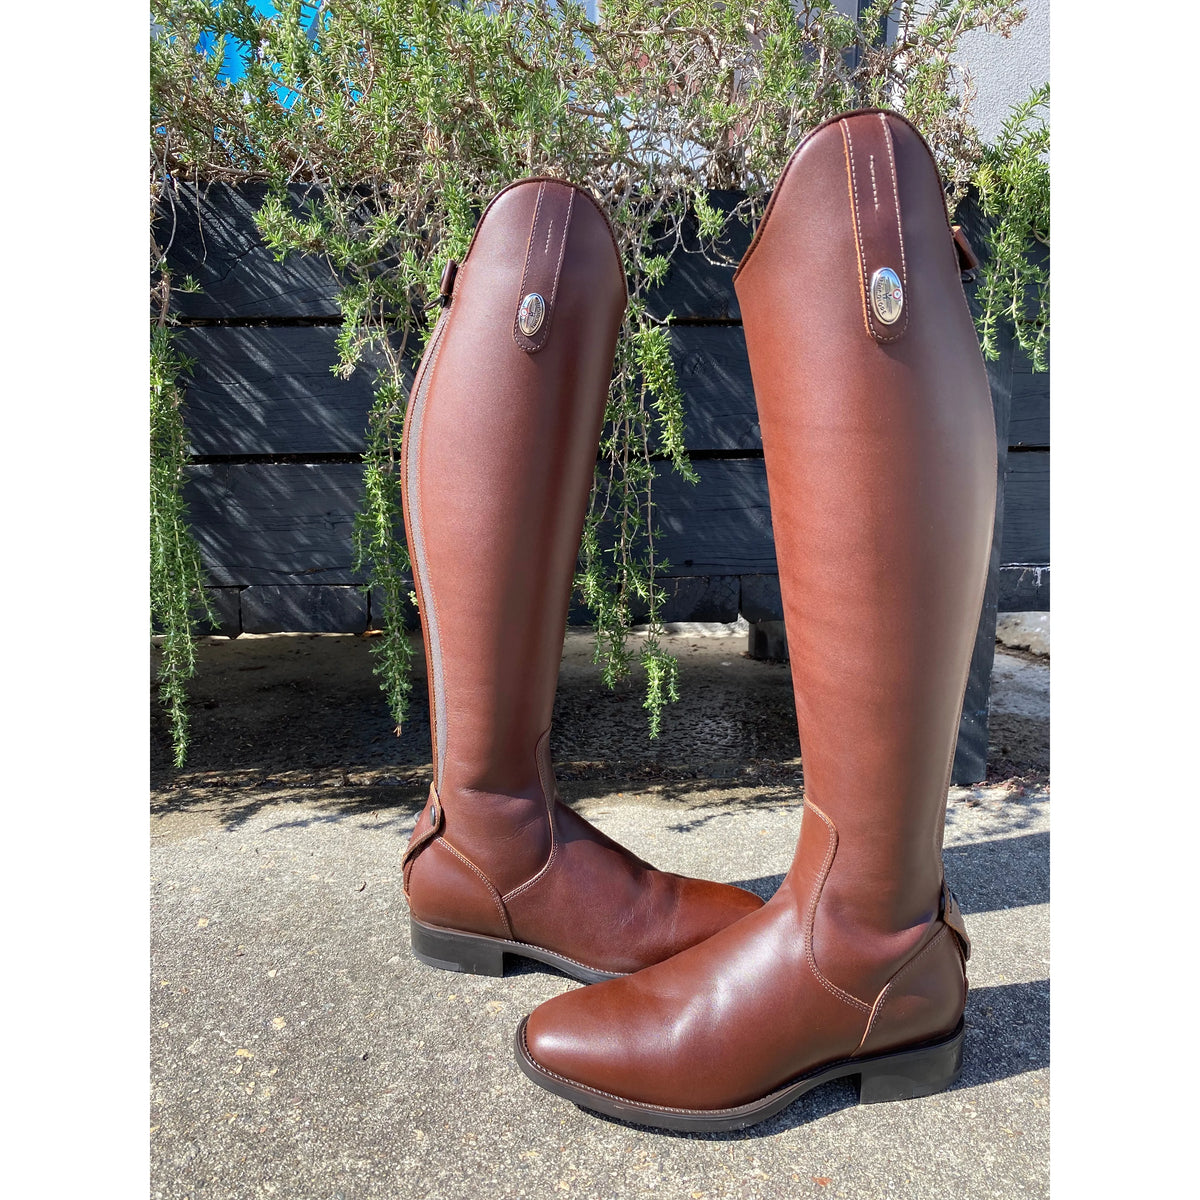 DENIRO BOOT CO FOOTWEAR Tricolore Italy Amabile Tall Boots in Brown